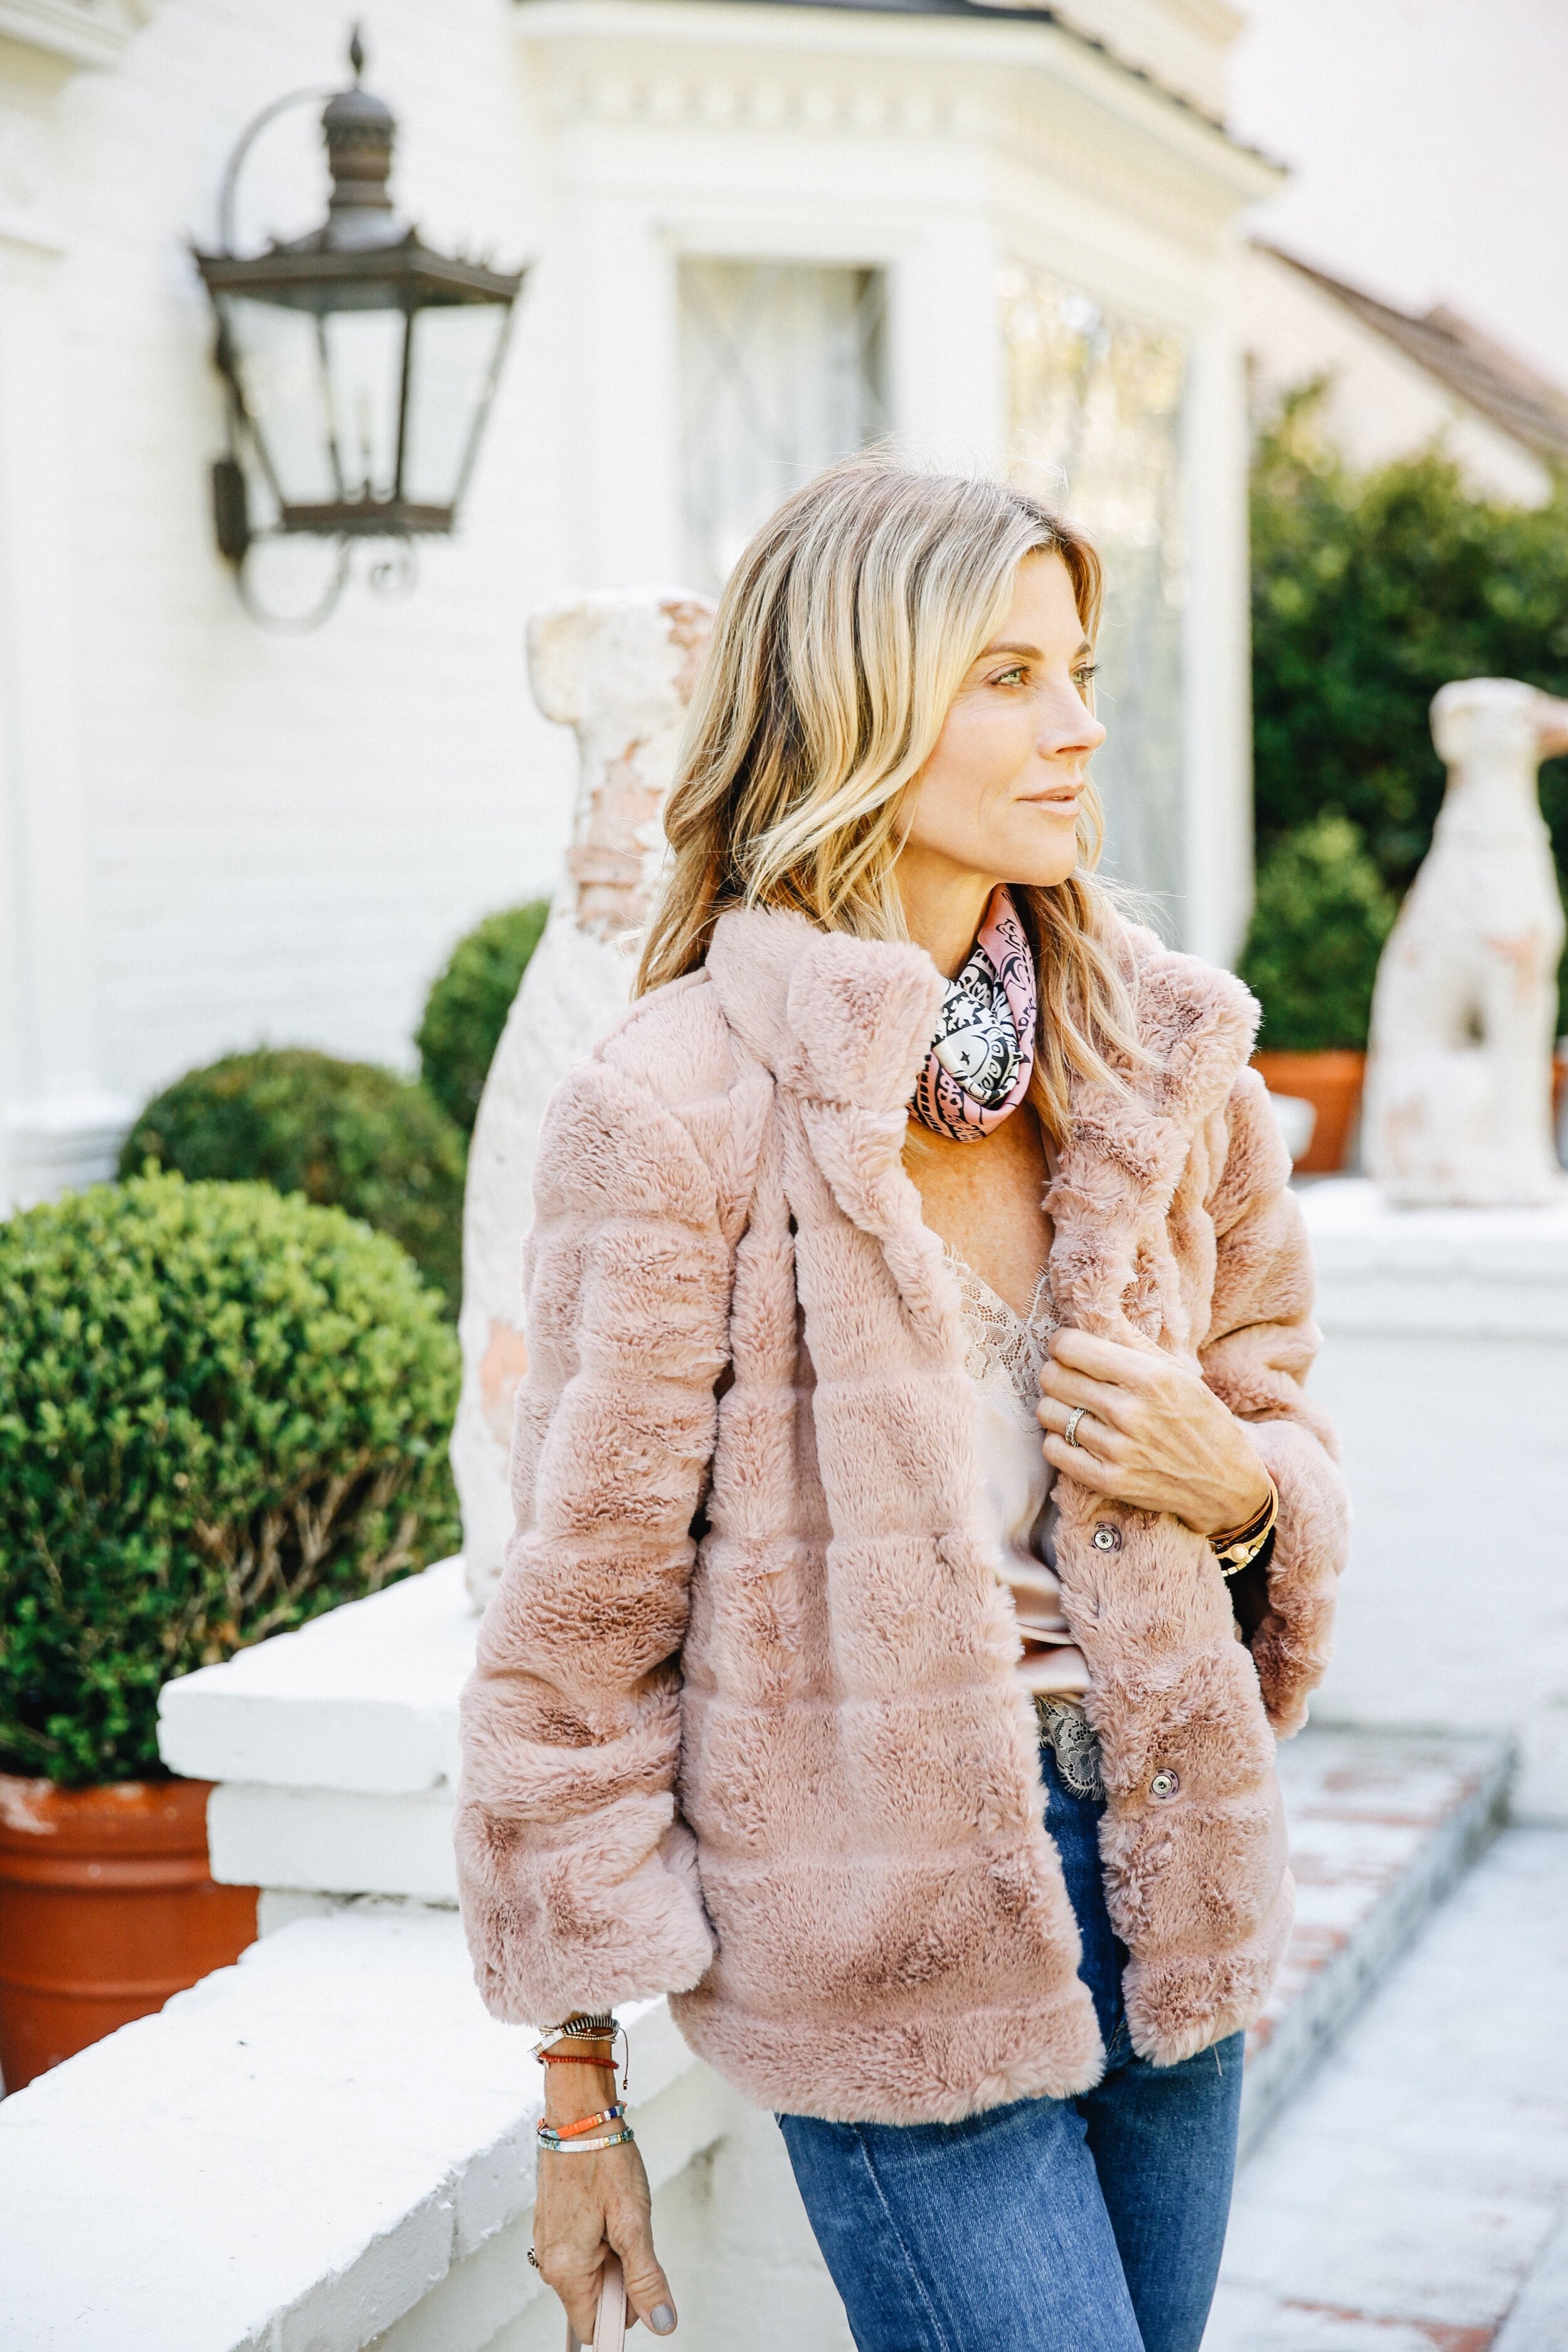 MEET MICHELLE - ROSÉ COLLECTION FAUX FROM — Gardenia FGXGG JACKET The THE FUR Grateful